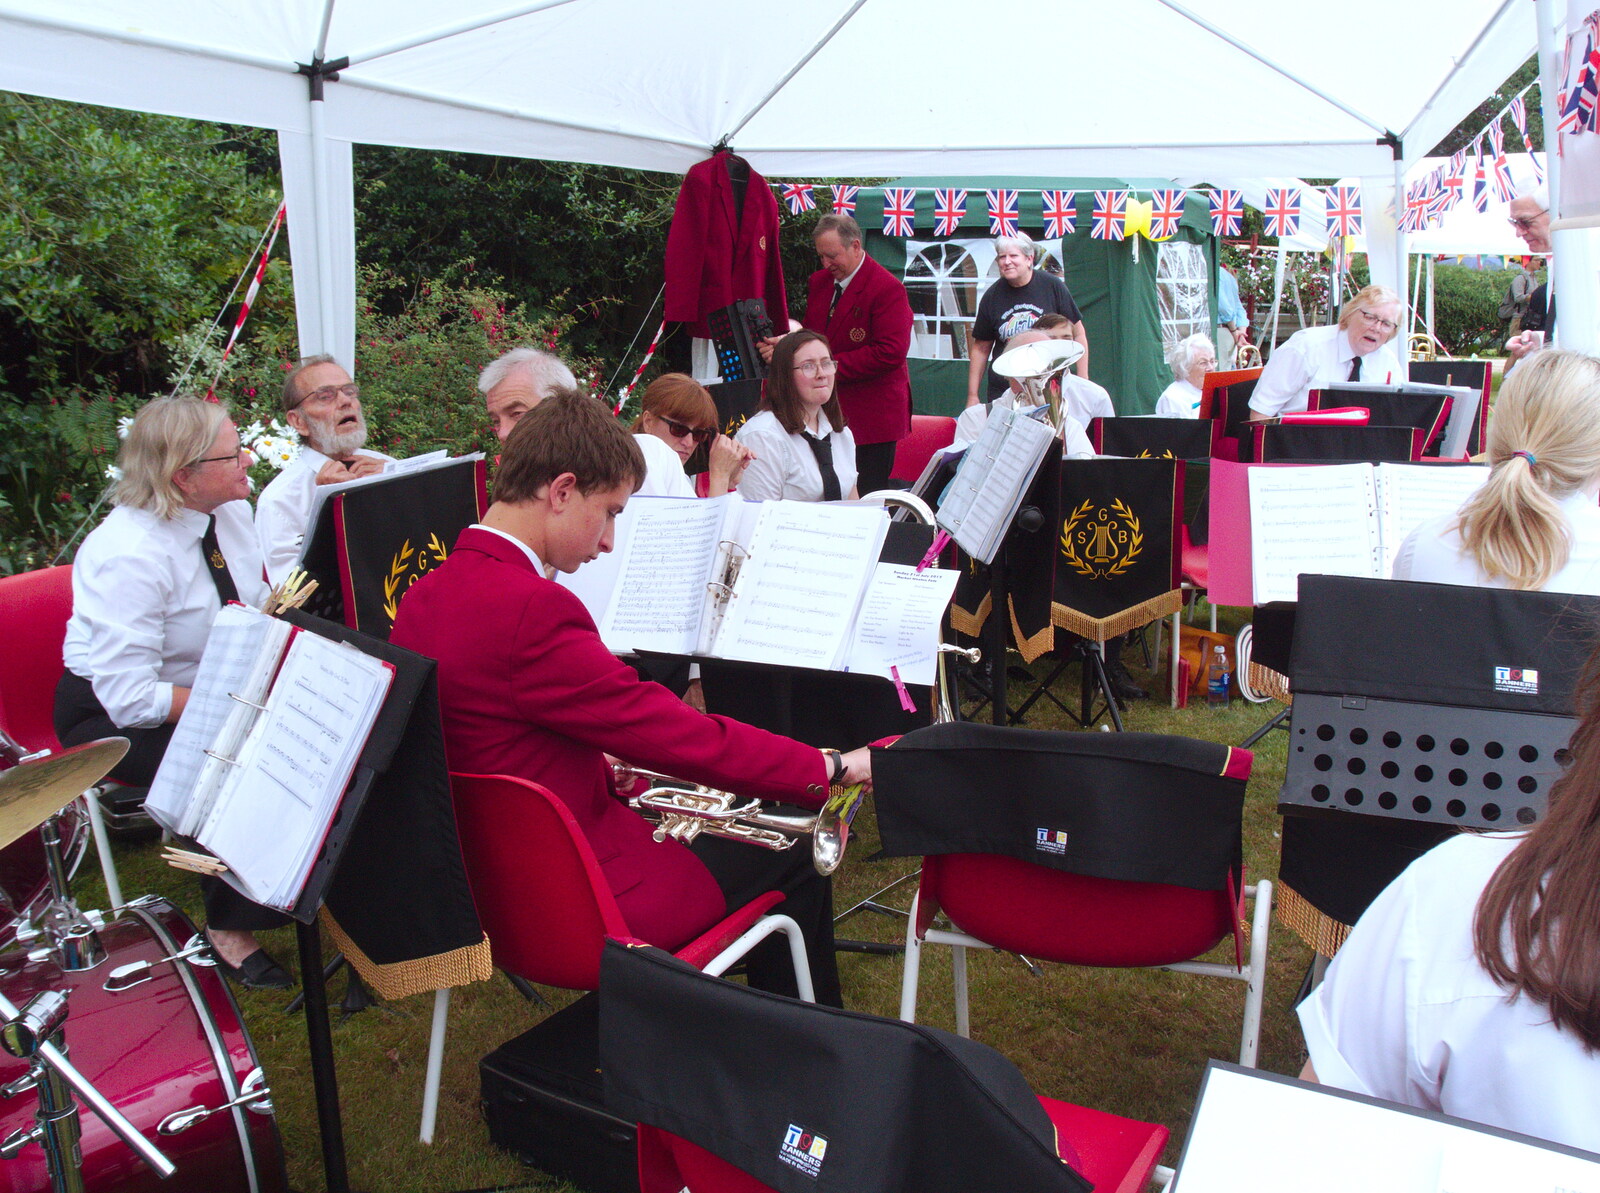 The band sets up from GSB at the Summer Fete, Market Weston, Suffolk - 20th July 2019